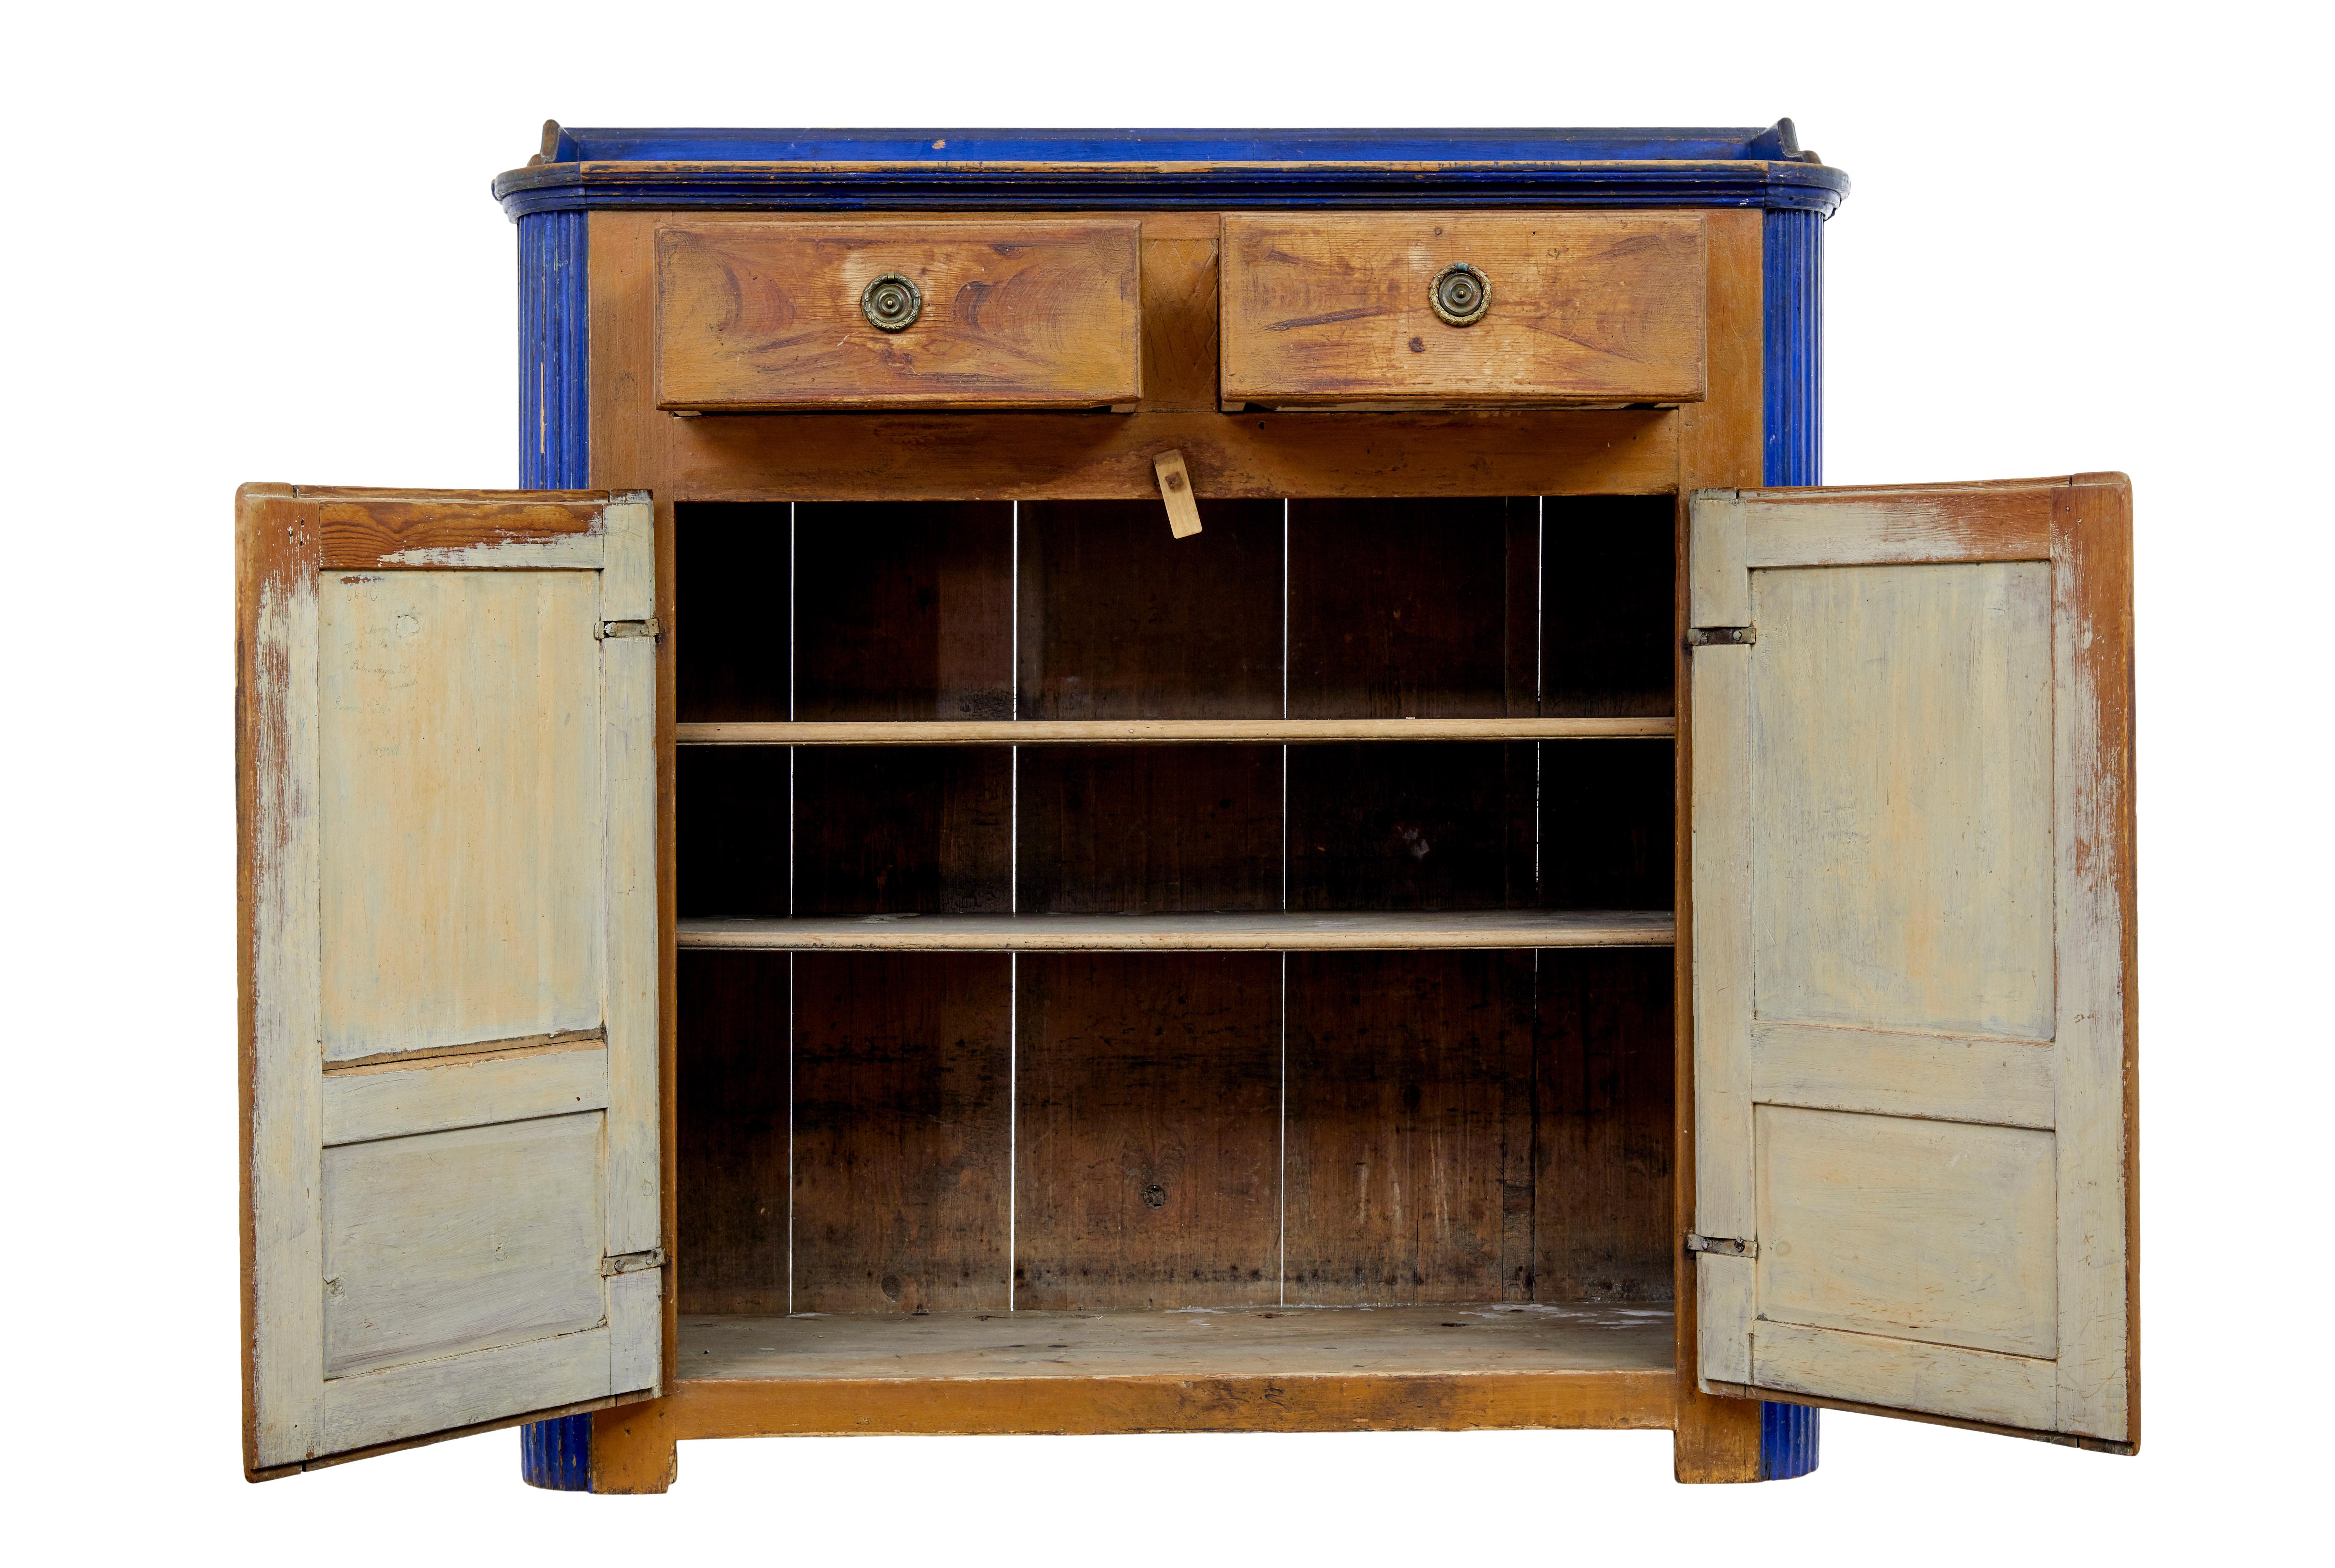 Rustic 19th Century Swedish Pine Ragwork Painted Kitchen Cupboard For Sale